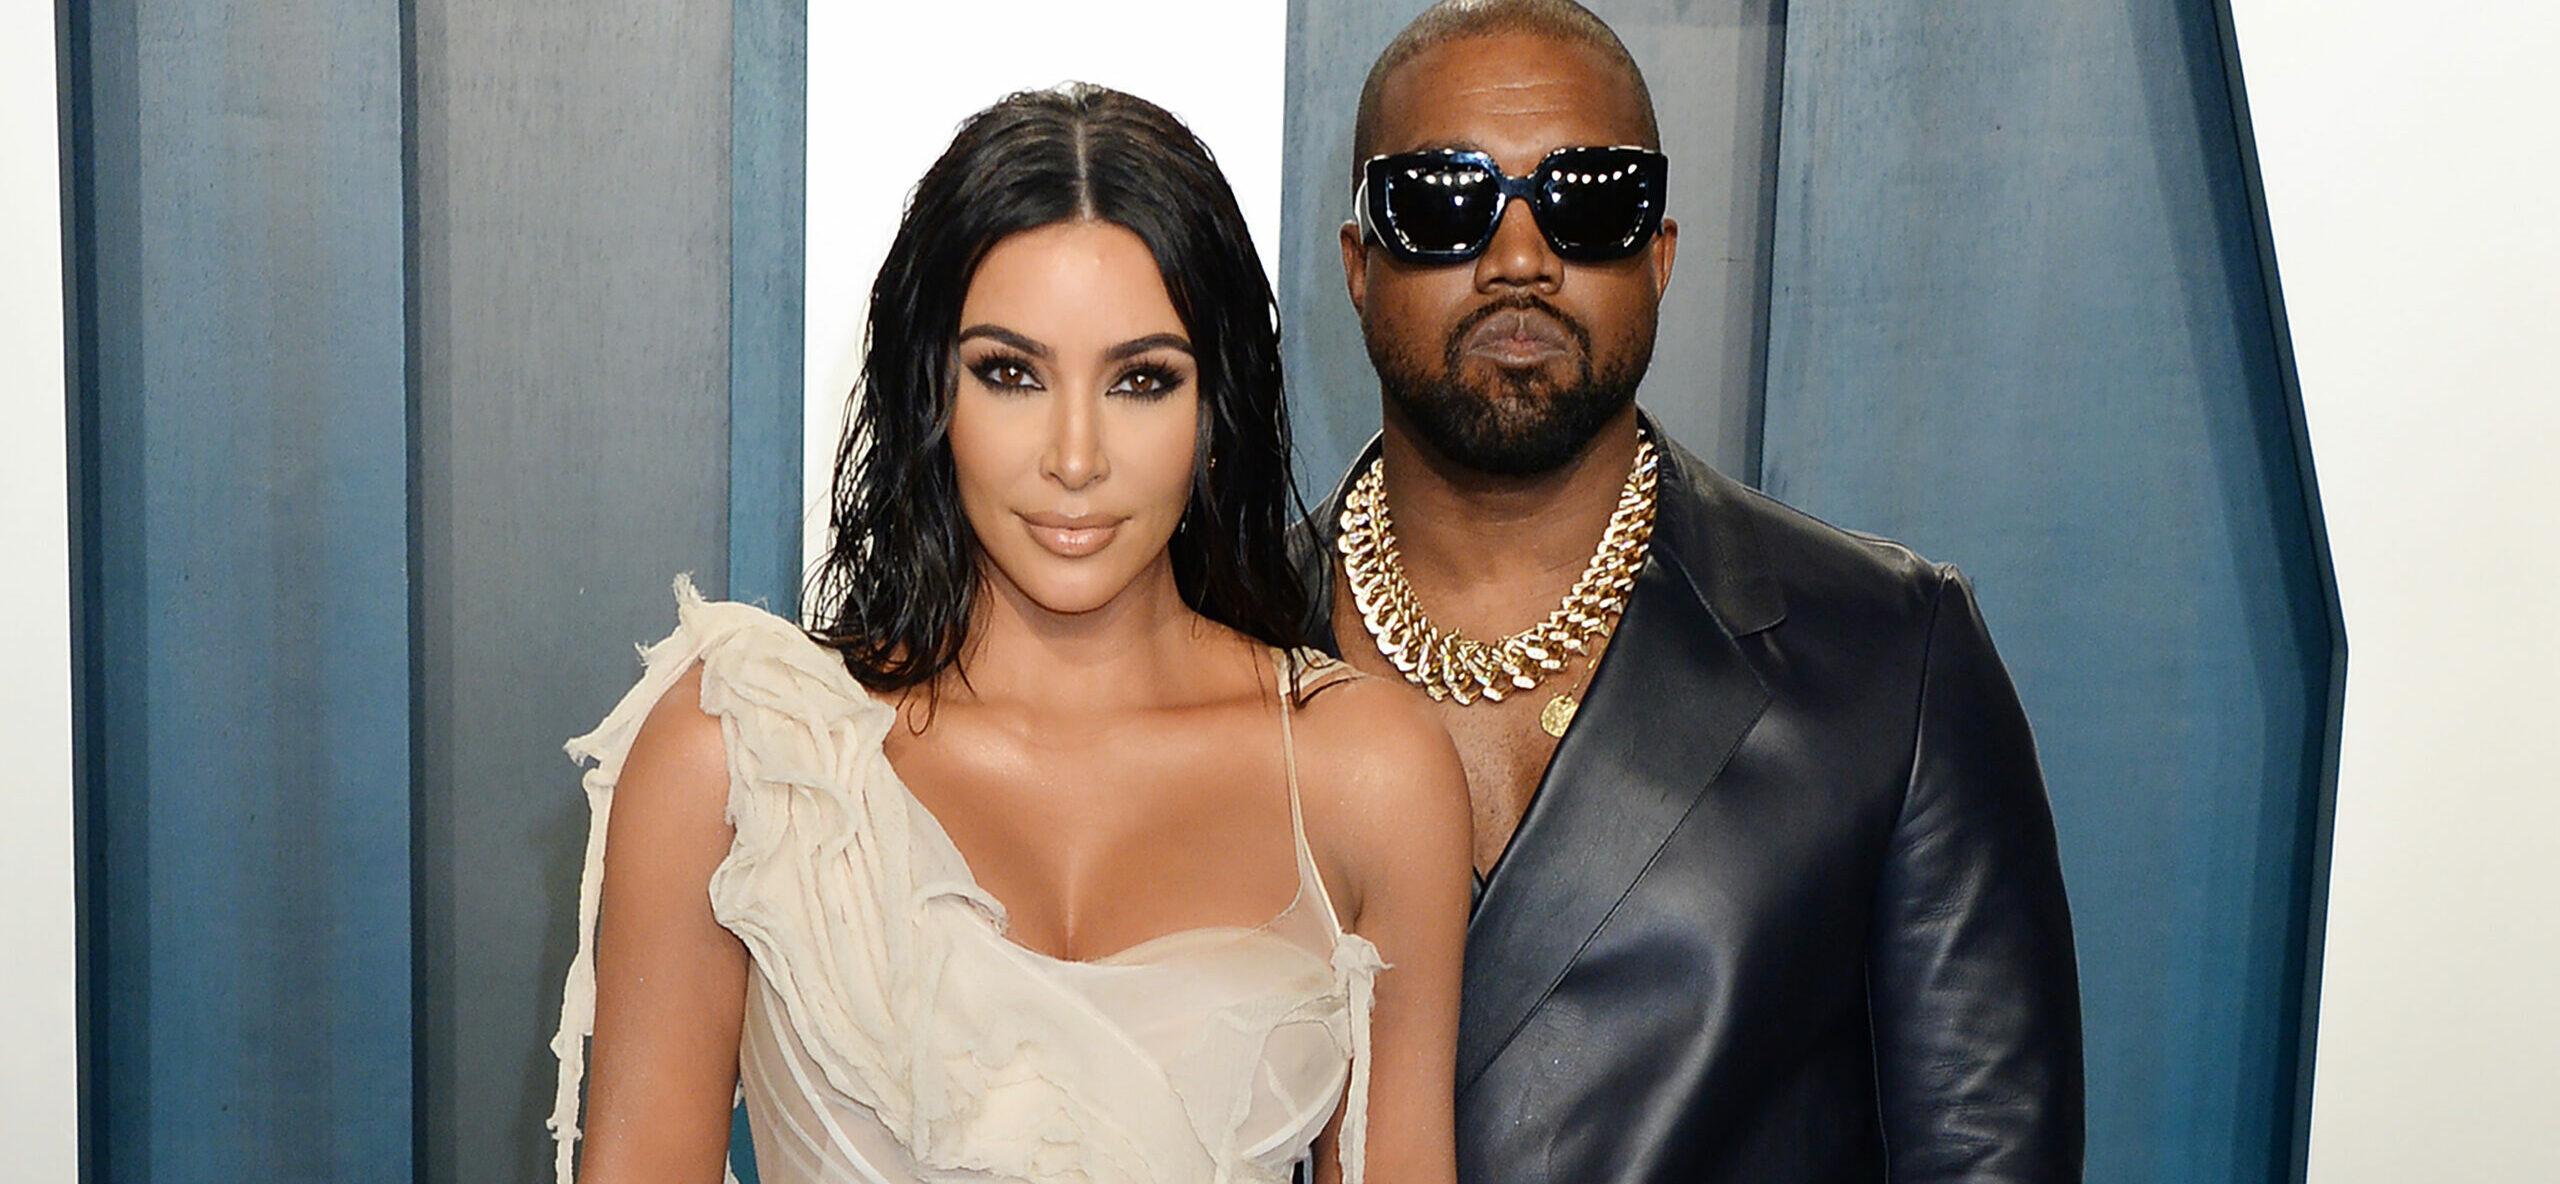 Kim Kardashian Reportedly Angry At Kanye West For Attacking Their Kids’ School